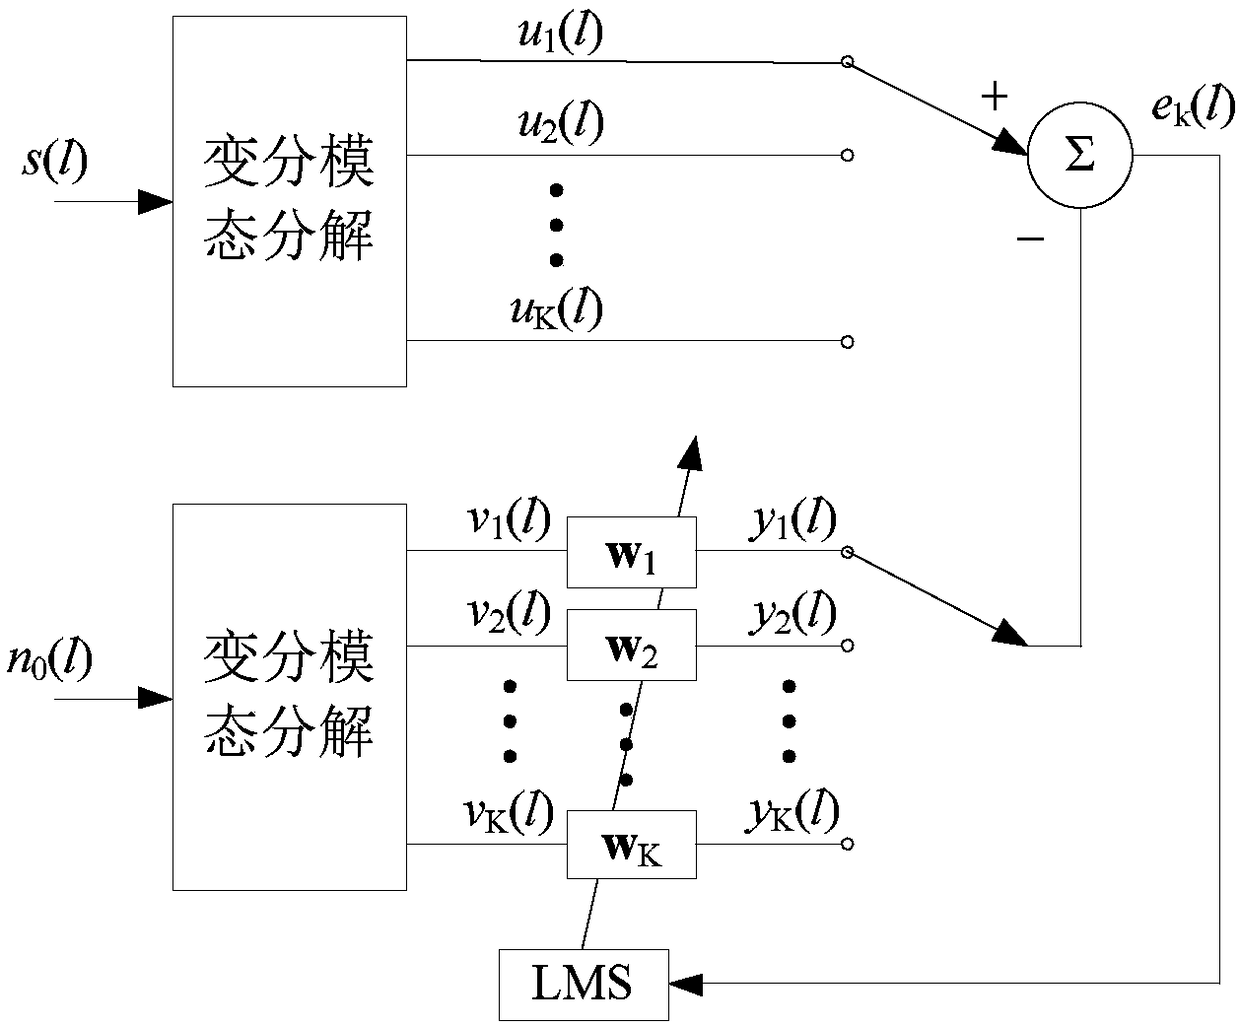 A signal noise reduction method based on variational mode decomposition and a minimum mean square error adaptive filter